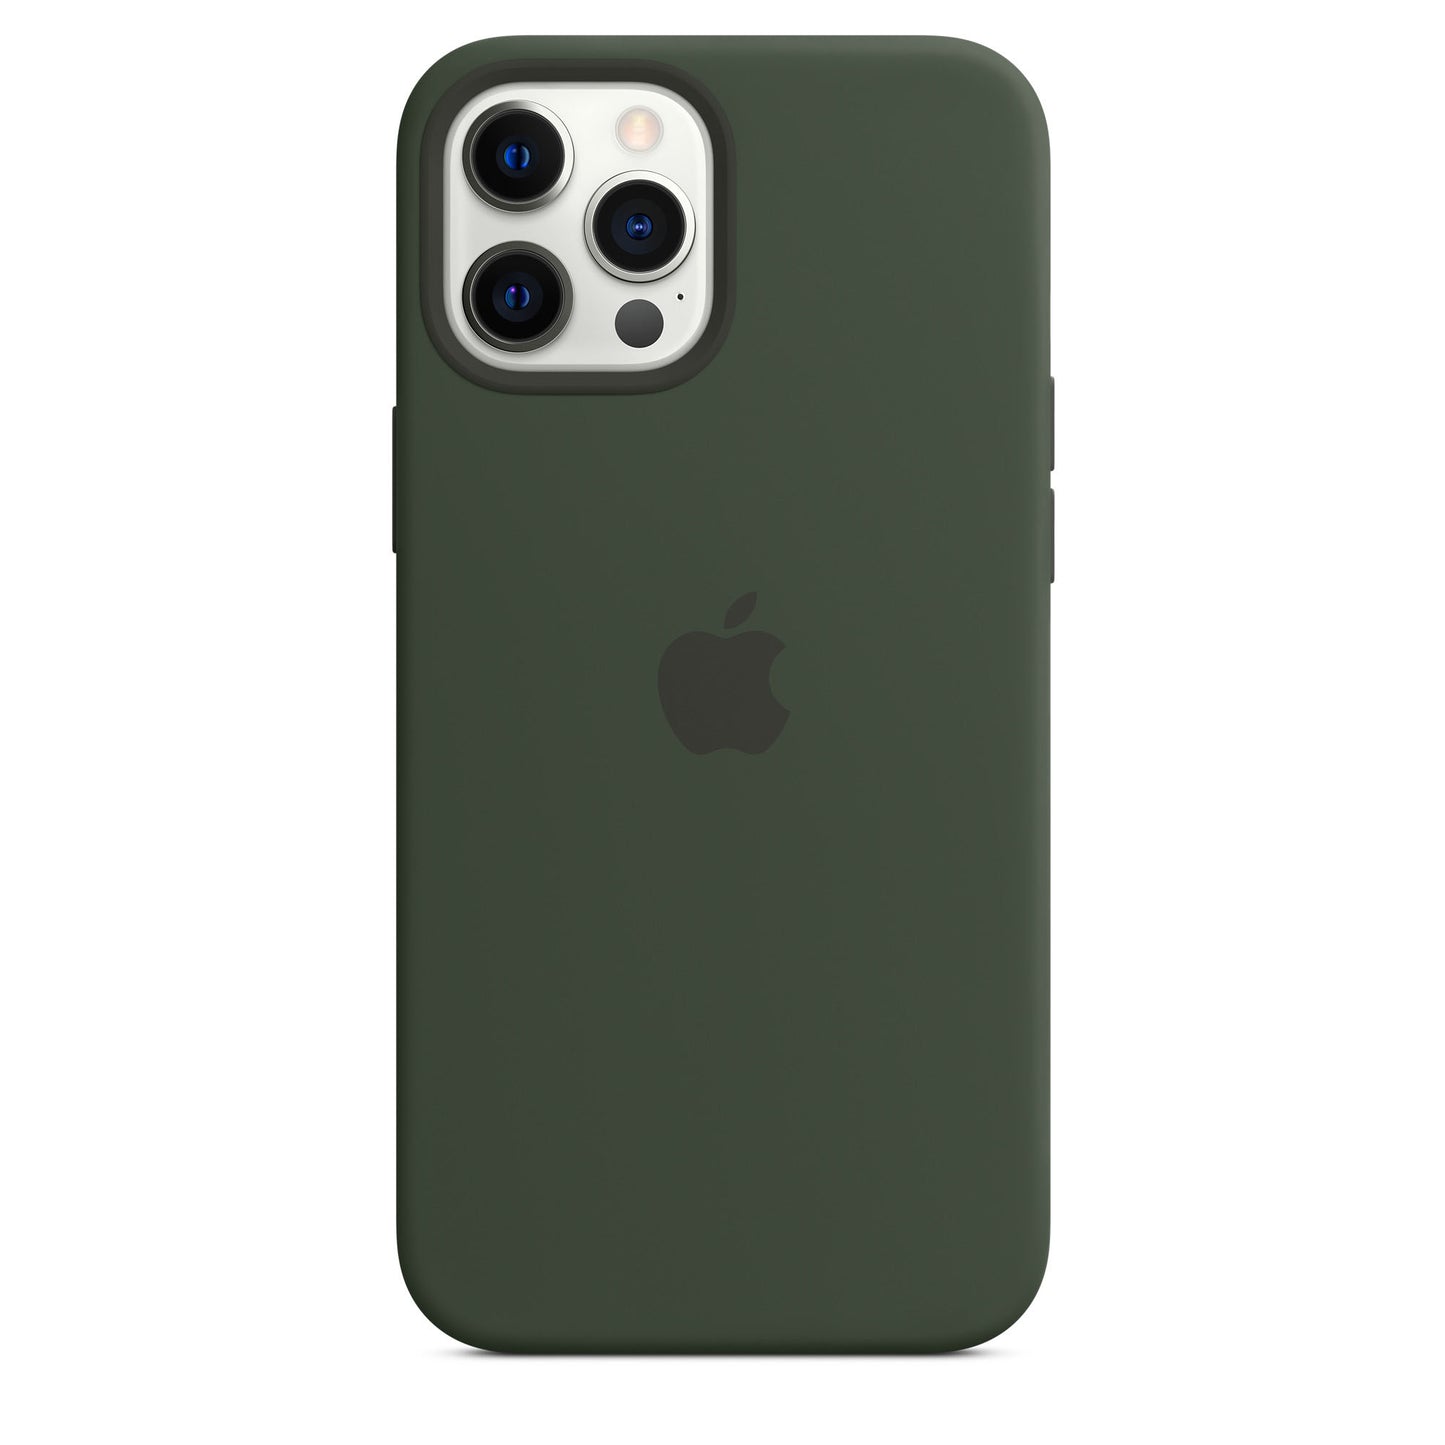 iPhone 12 Pro Max Silicone Case with MagSafe - Cypress Green